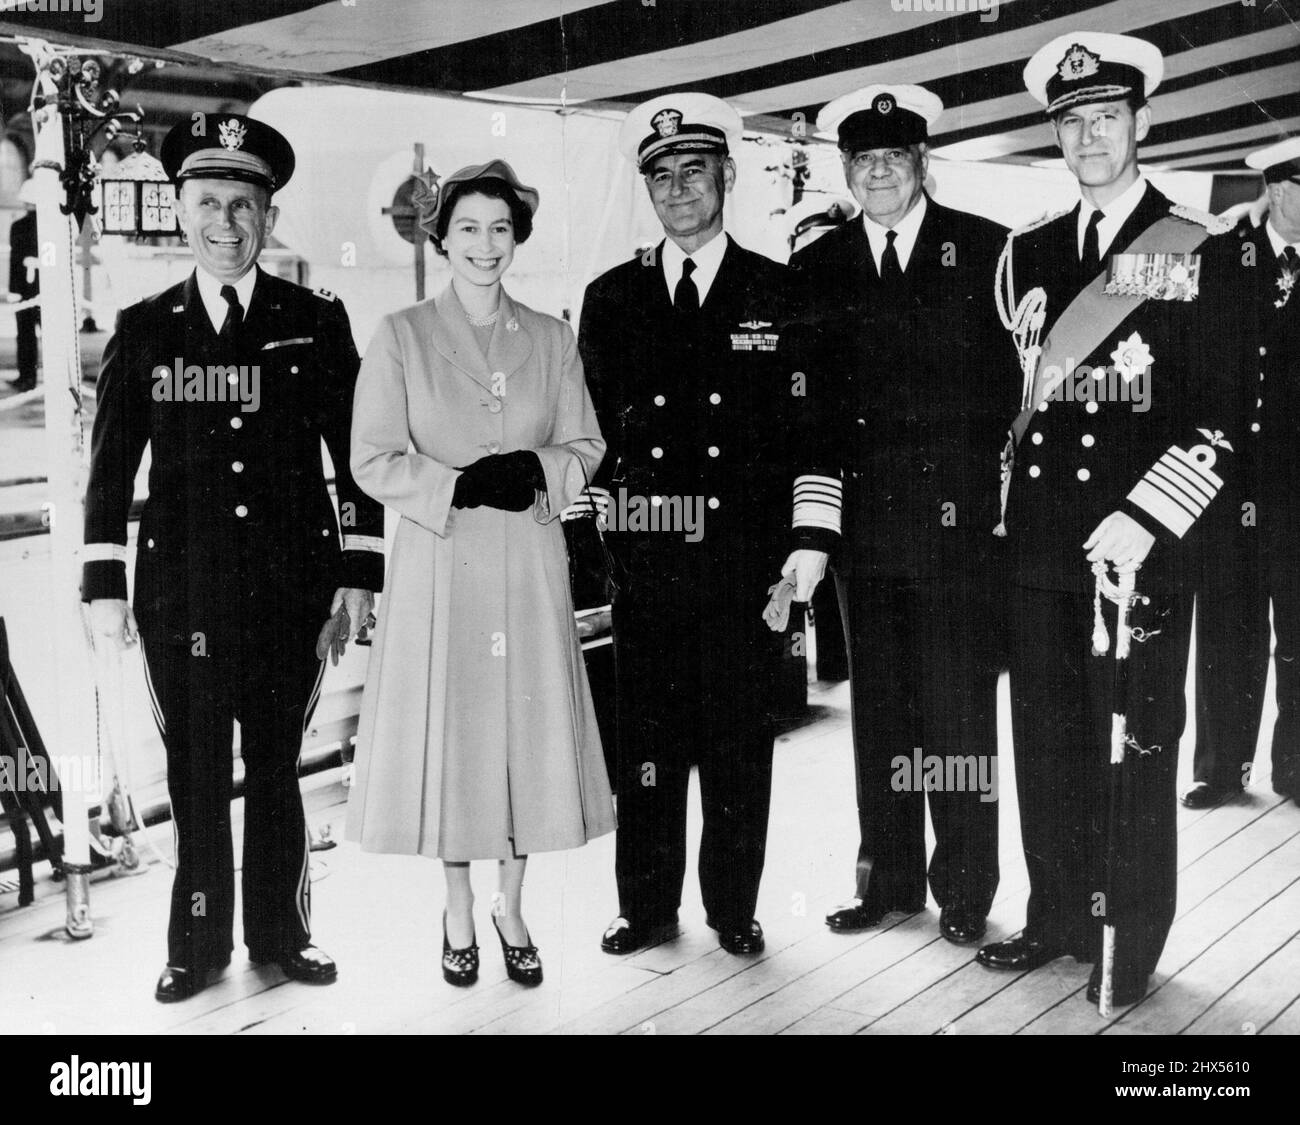 The Queen Receives High Ranking Naval Officers Aboard The Royal Yacht -- A happy group aboard H. M. S. surprise comprising (left to right) Lt. Gen A. Gruenther (Chief of Staff of S.H.A.P.E. ); H.M. The Queen; Admiral Lynde McCormick (Supreme Allied Commander, Atlantic); Lord Ismay (Secretary General N.A.T.O) and H.R.H. The Duke of Edinburgh.H.M. The Queen between decks on the Royal Yacht Surprise) received the first Lord of the Admiralty, Mr. J. P. L. Thomas, who presented to her and the Duke of Edinburgh, the members of the Board of Admiralty, Lord Ismay, Secretary General of N.A.T.O., the Su Stock Photo